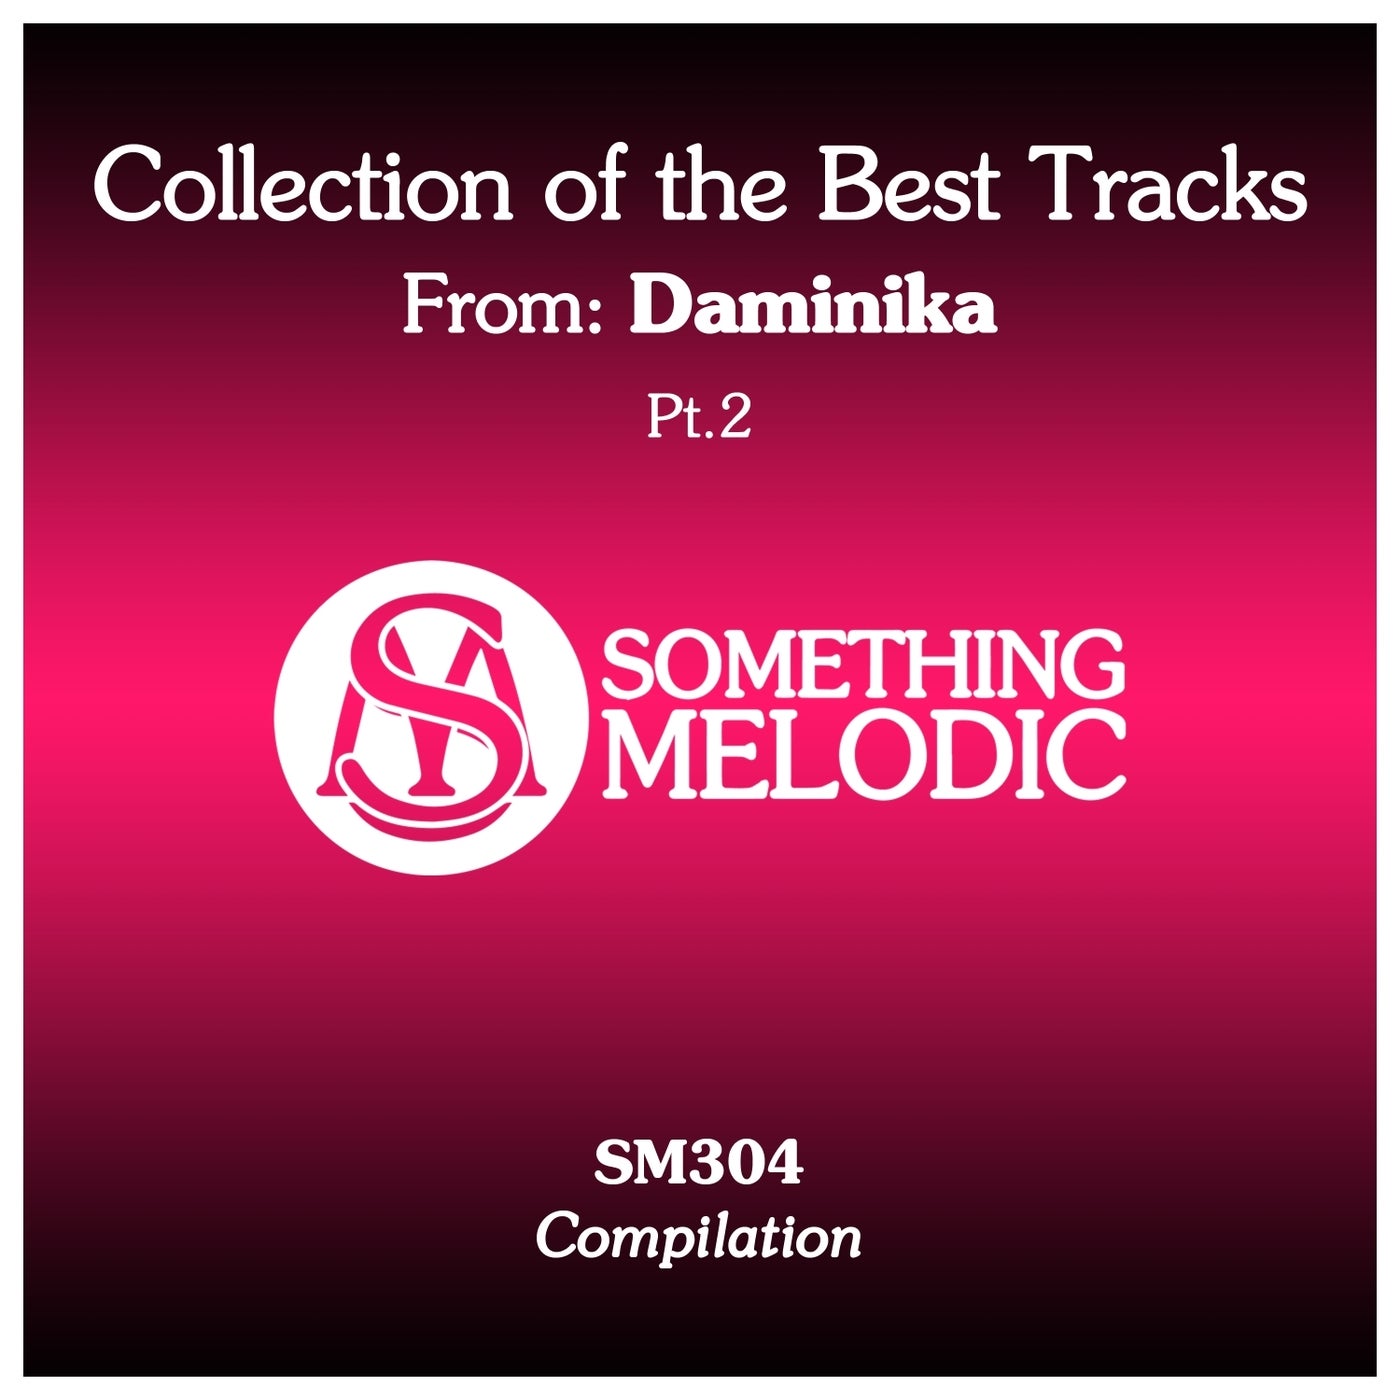 Collection of the Best Tracks From: Daminika, Pt. 2